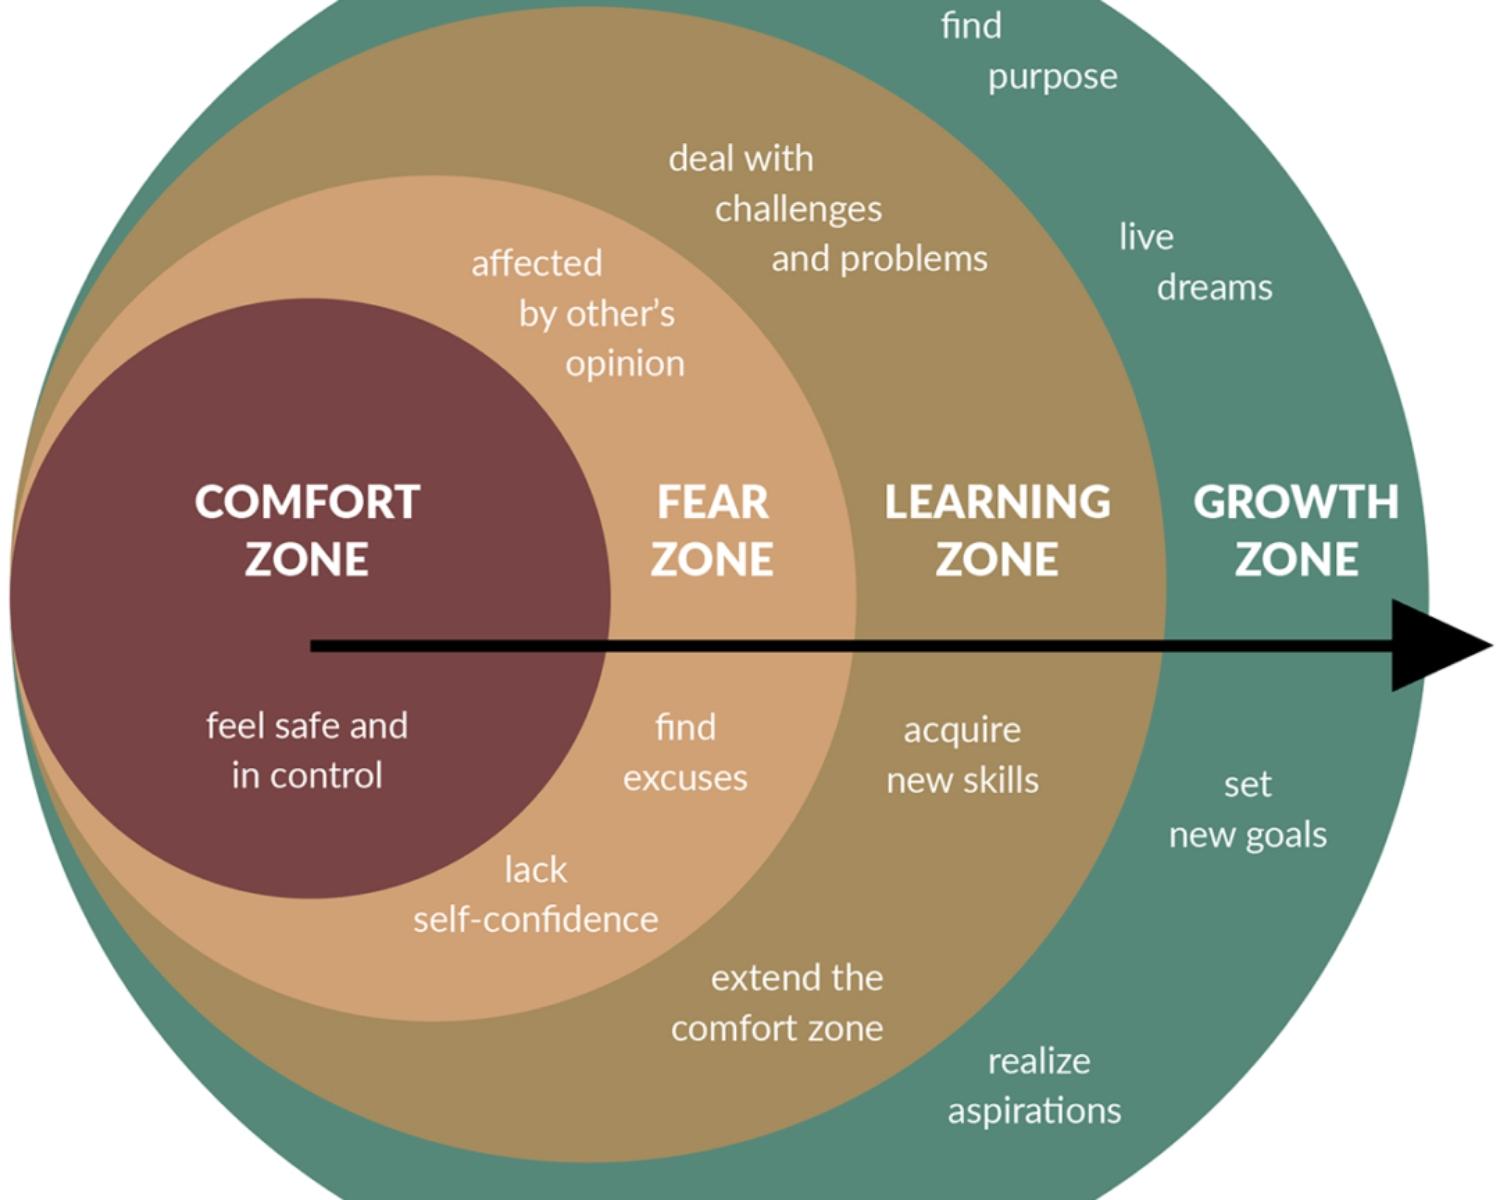 Transitioning from the Comfort Zone to the Growth Zone